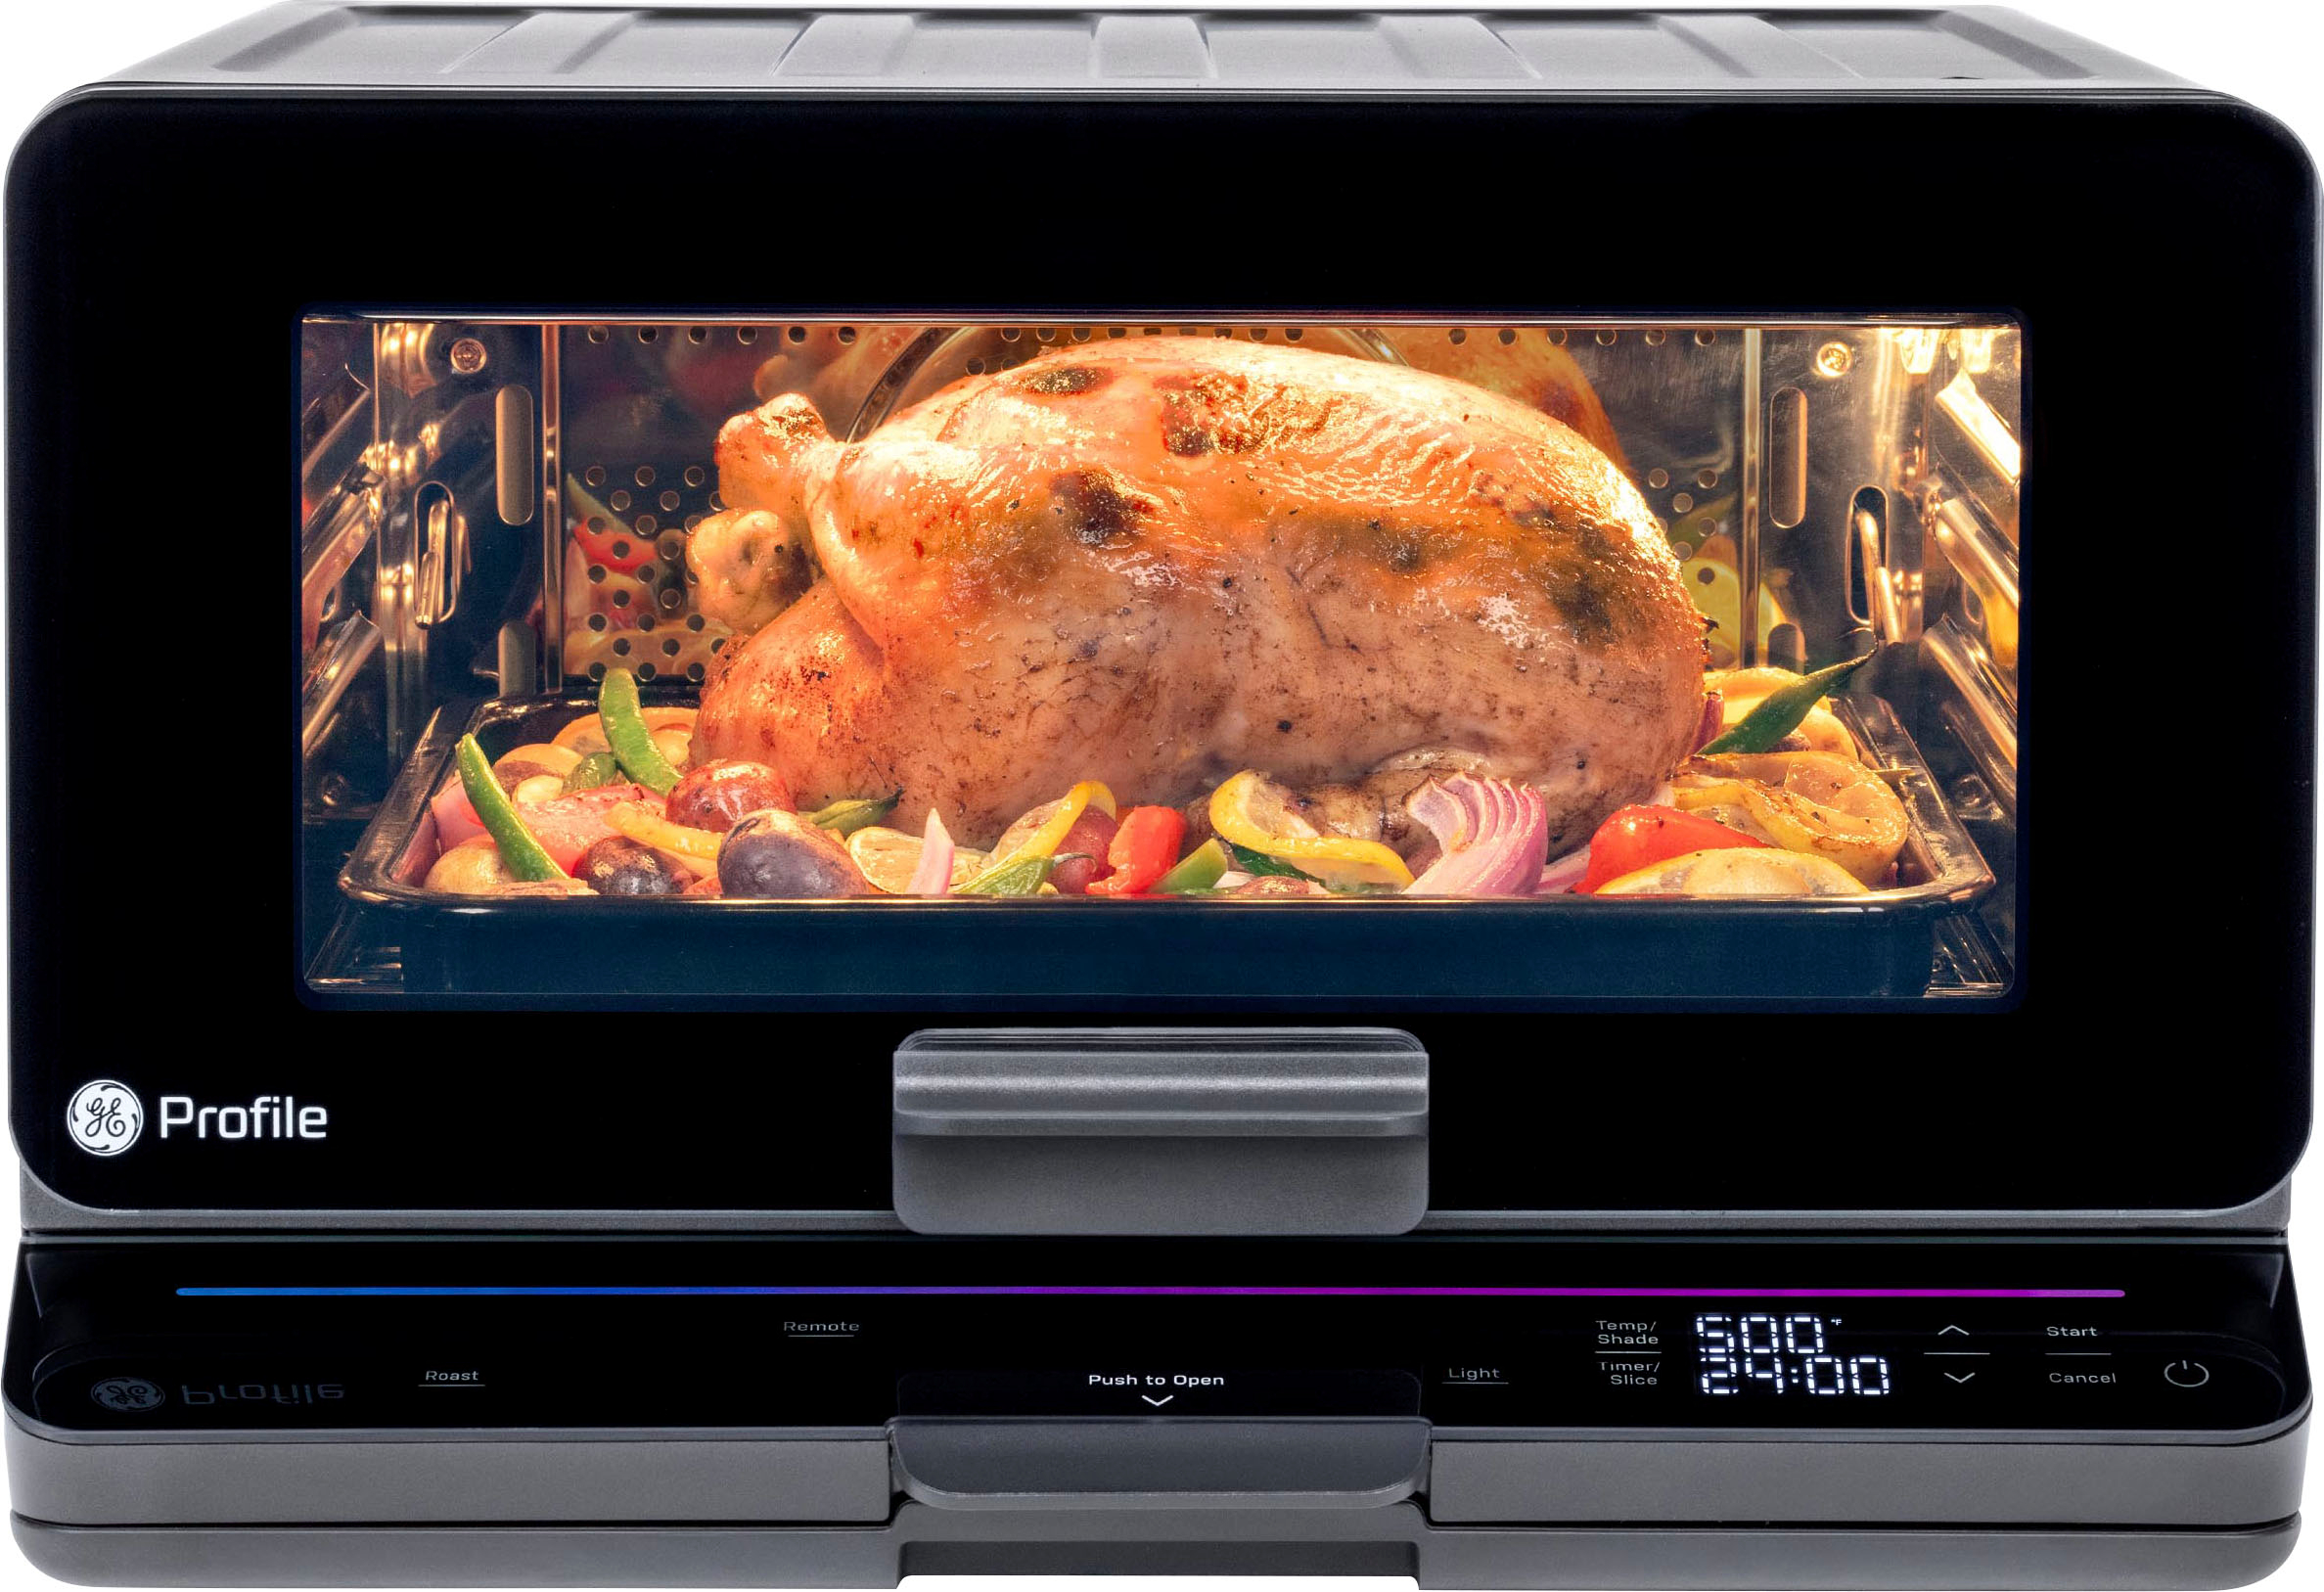 This Genius Smart Oven Is 2020's Instant Pot — And It's 32 Percent Off  Today